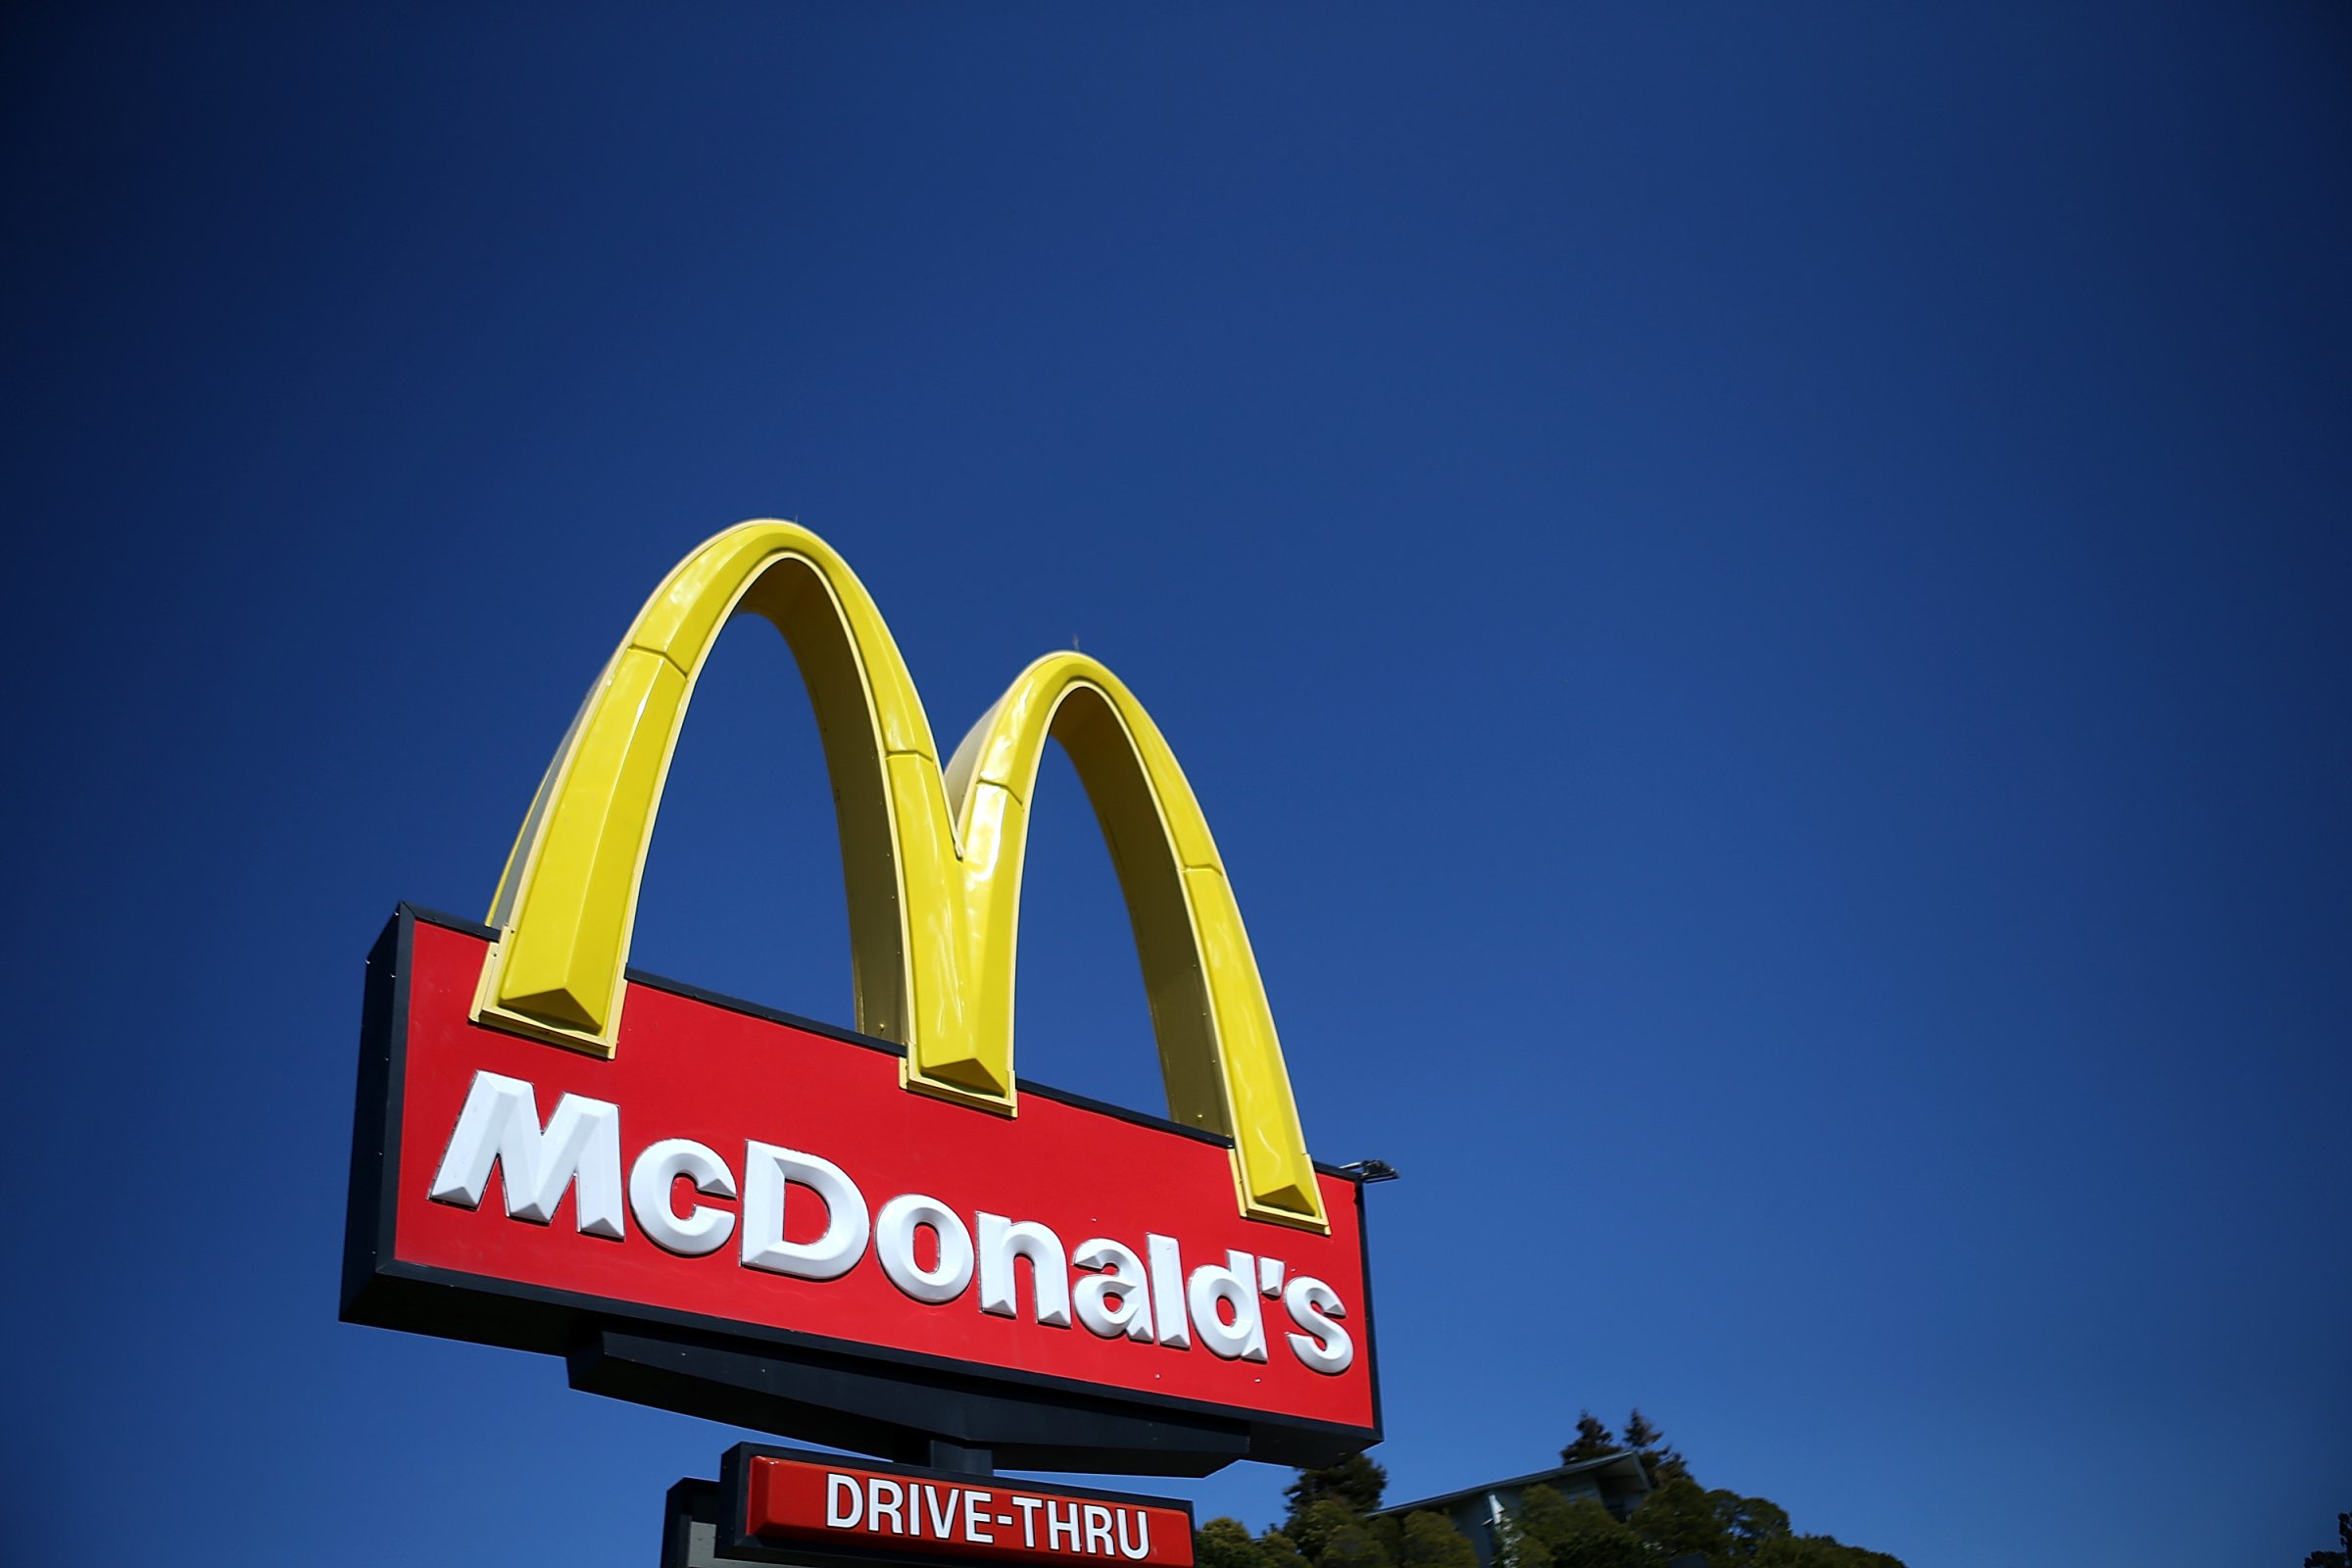 A McDonald's restaurant on March 12, 2013 in Mill Valley, California.